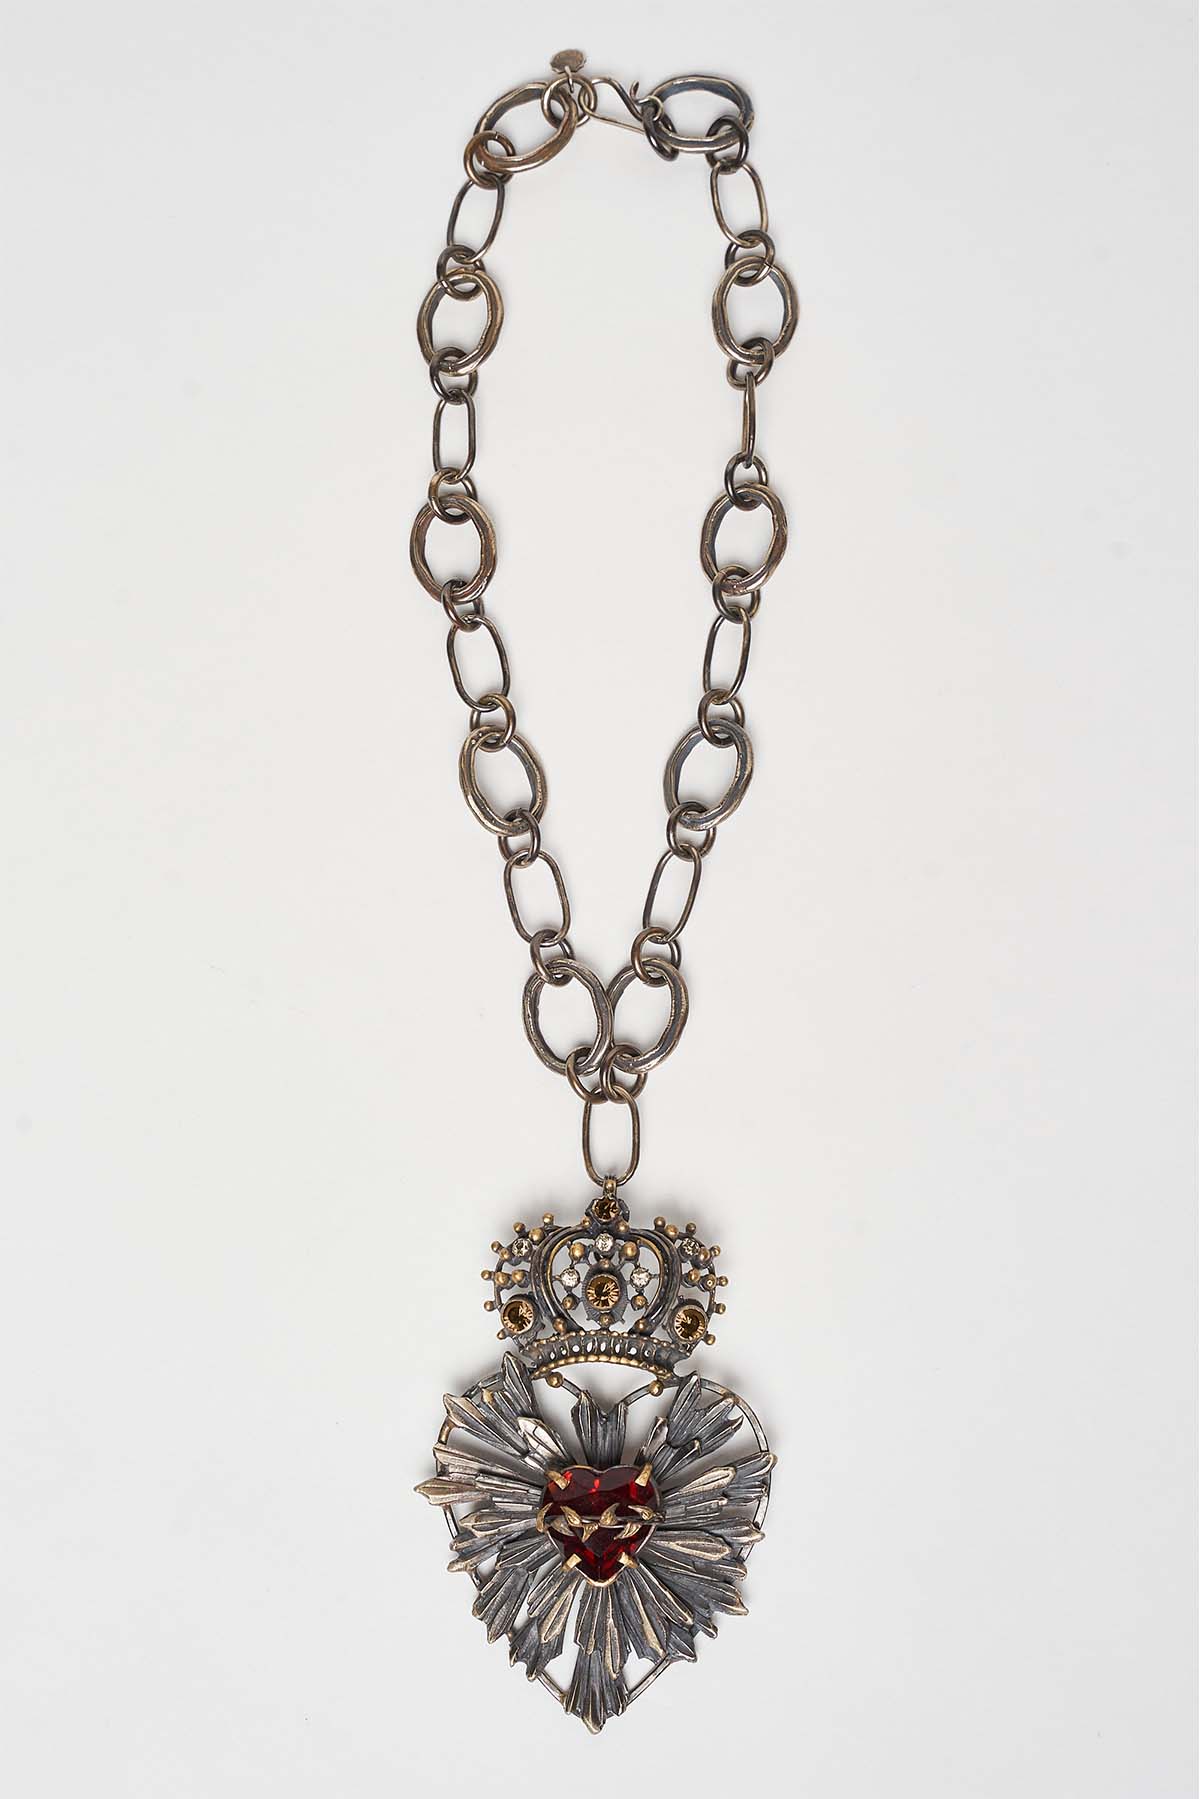 CORAZON CROWN SAGRADO NECKLACE WITH HAND FACETED GLASS